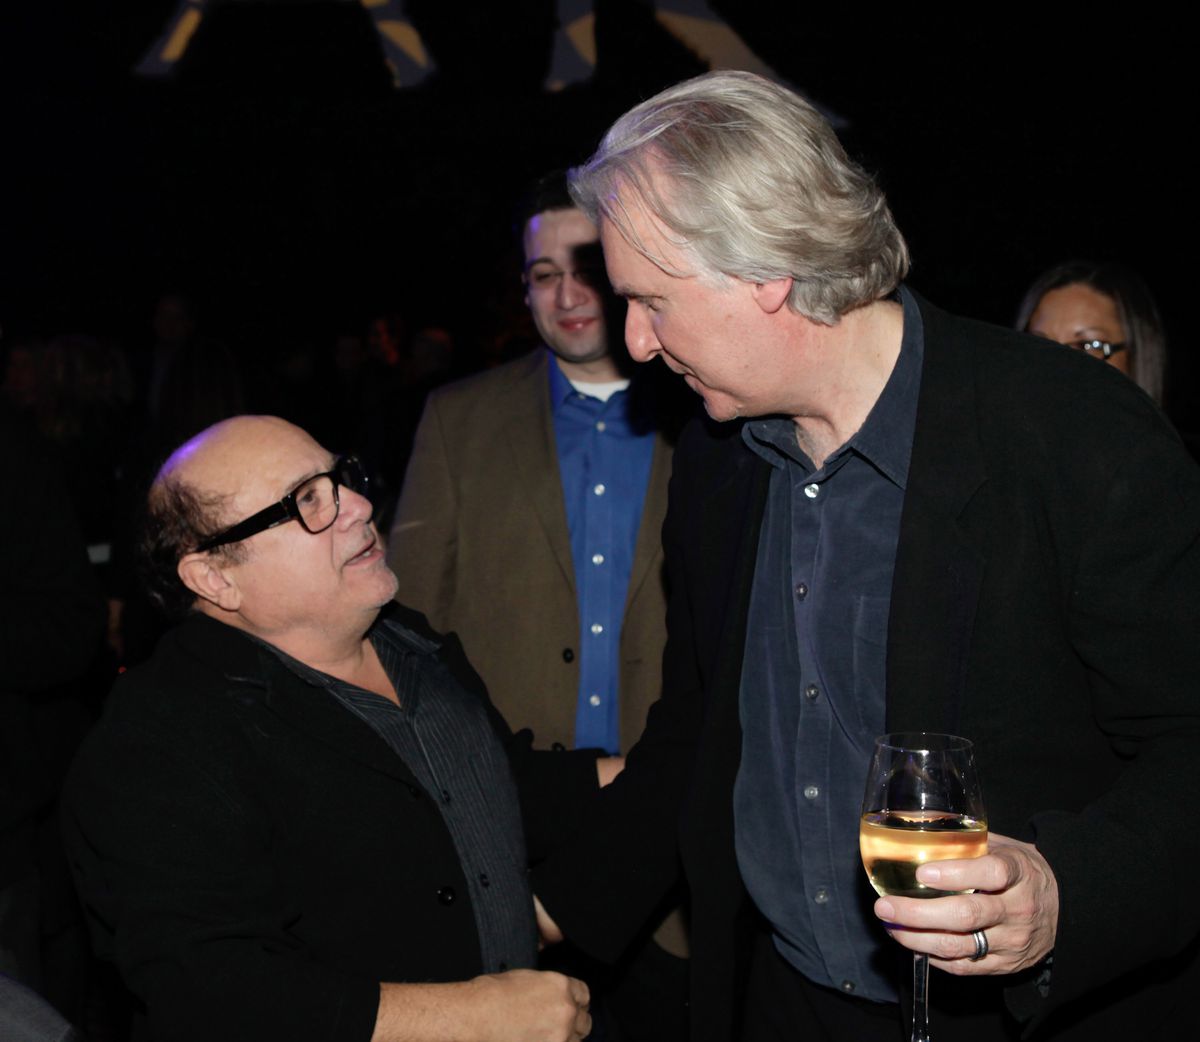 Danny DeVito looking up to talk to director James Cameron, who’s holding a glass of white wine at the afterparty for Avatar